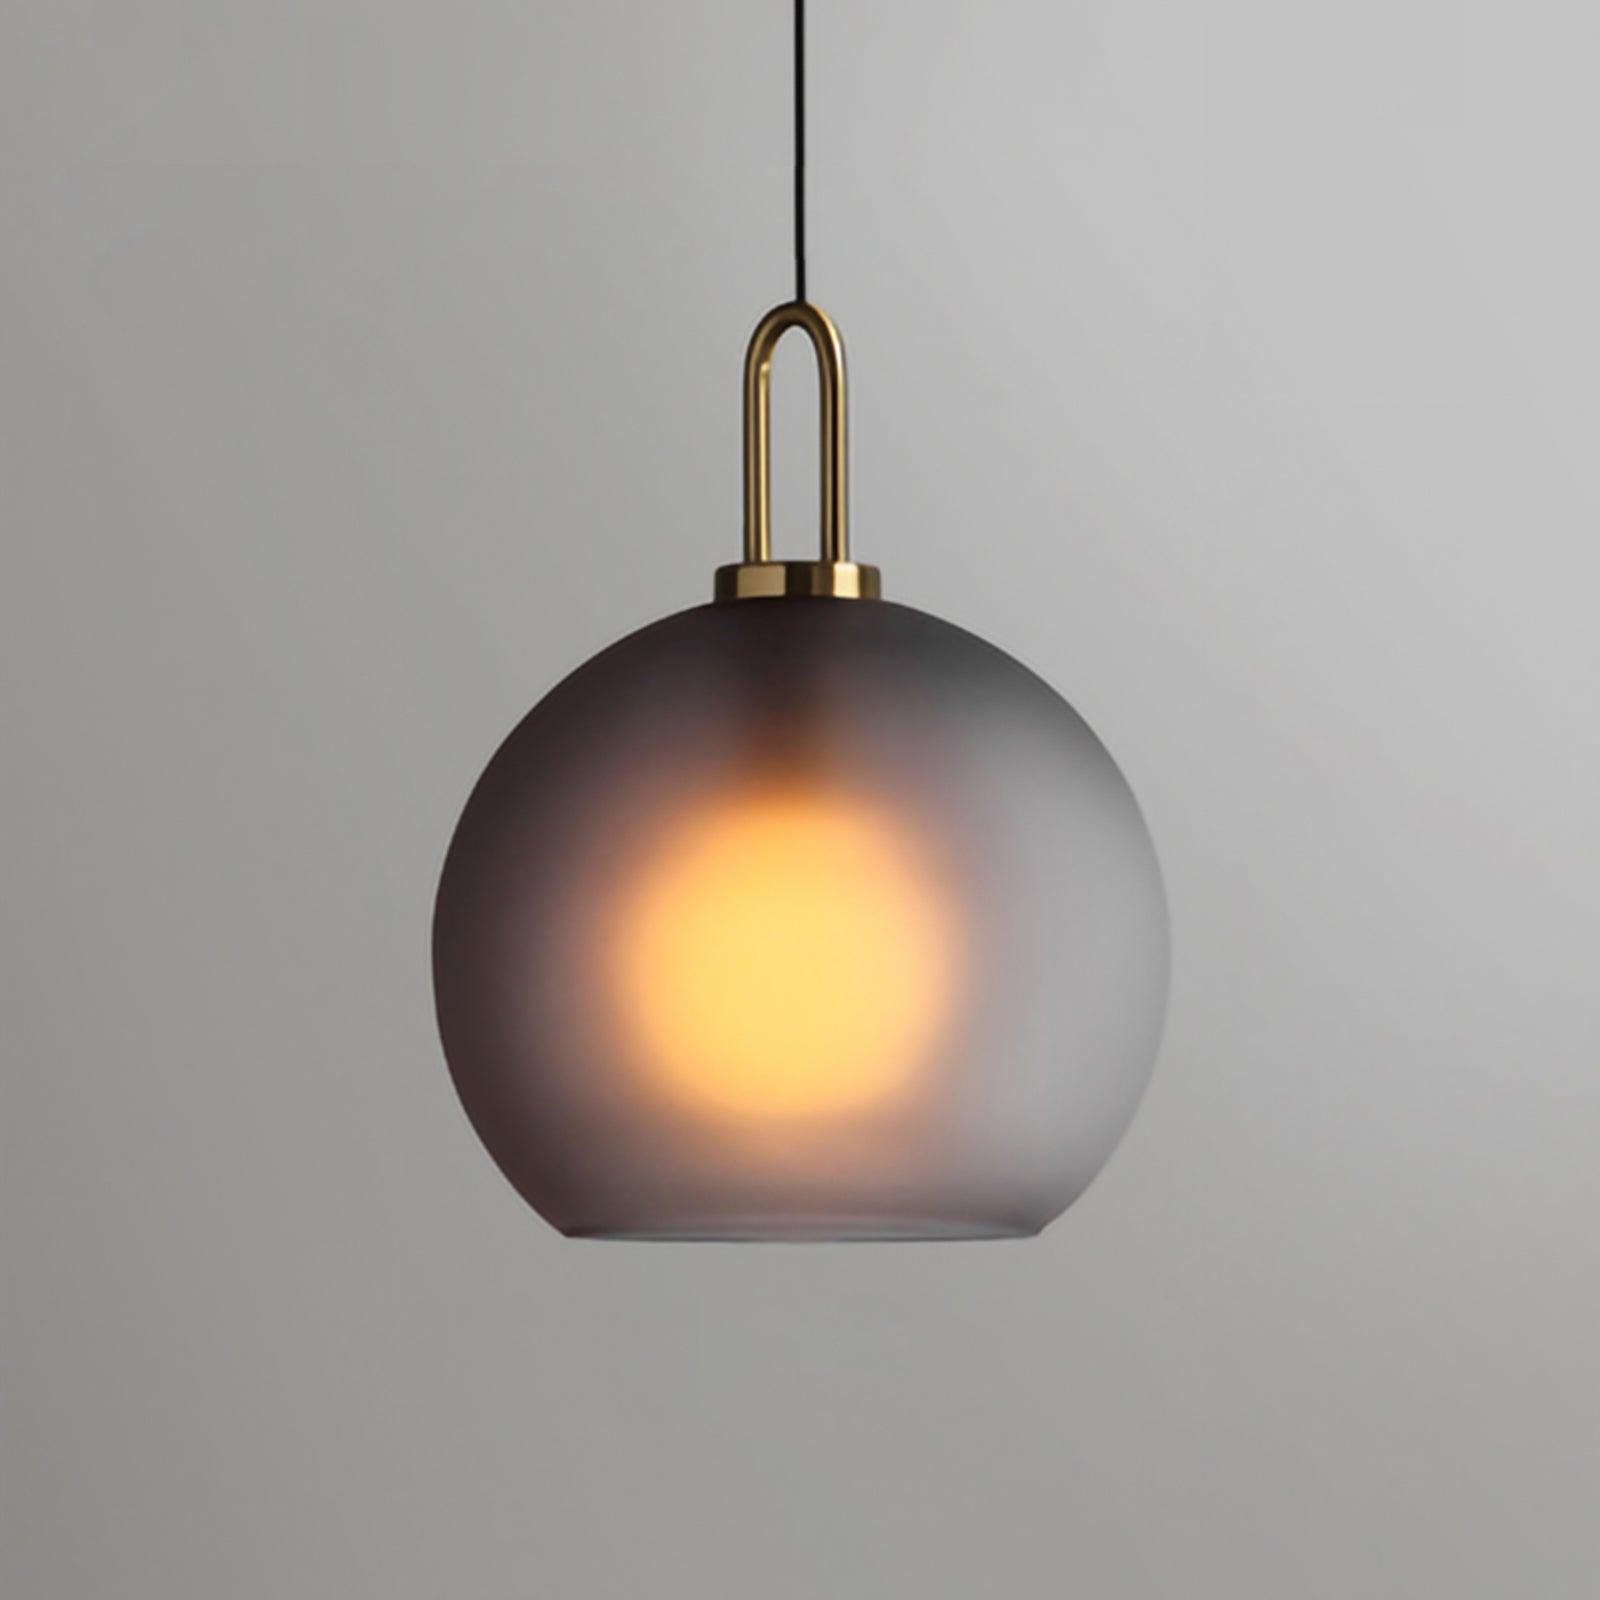 Frosted Glass Pendant Light with Dimensions 11.8" Diameter x 15.4" Height or 30cm Diameter x 39cm Height